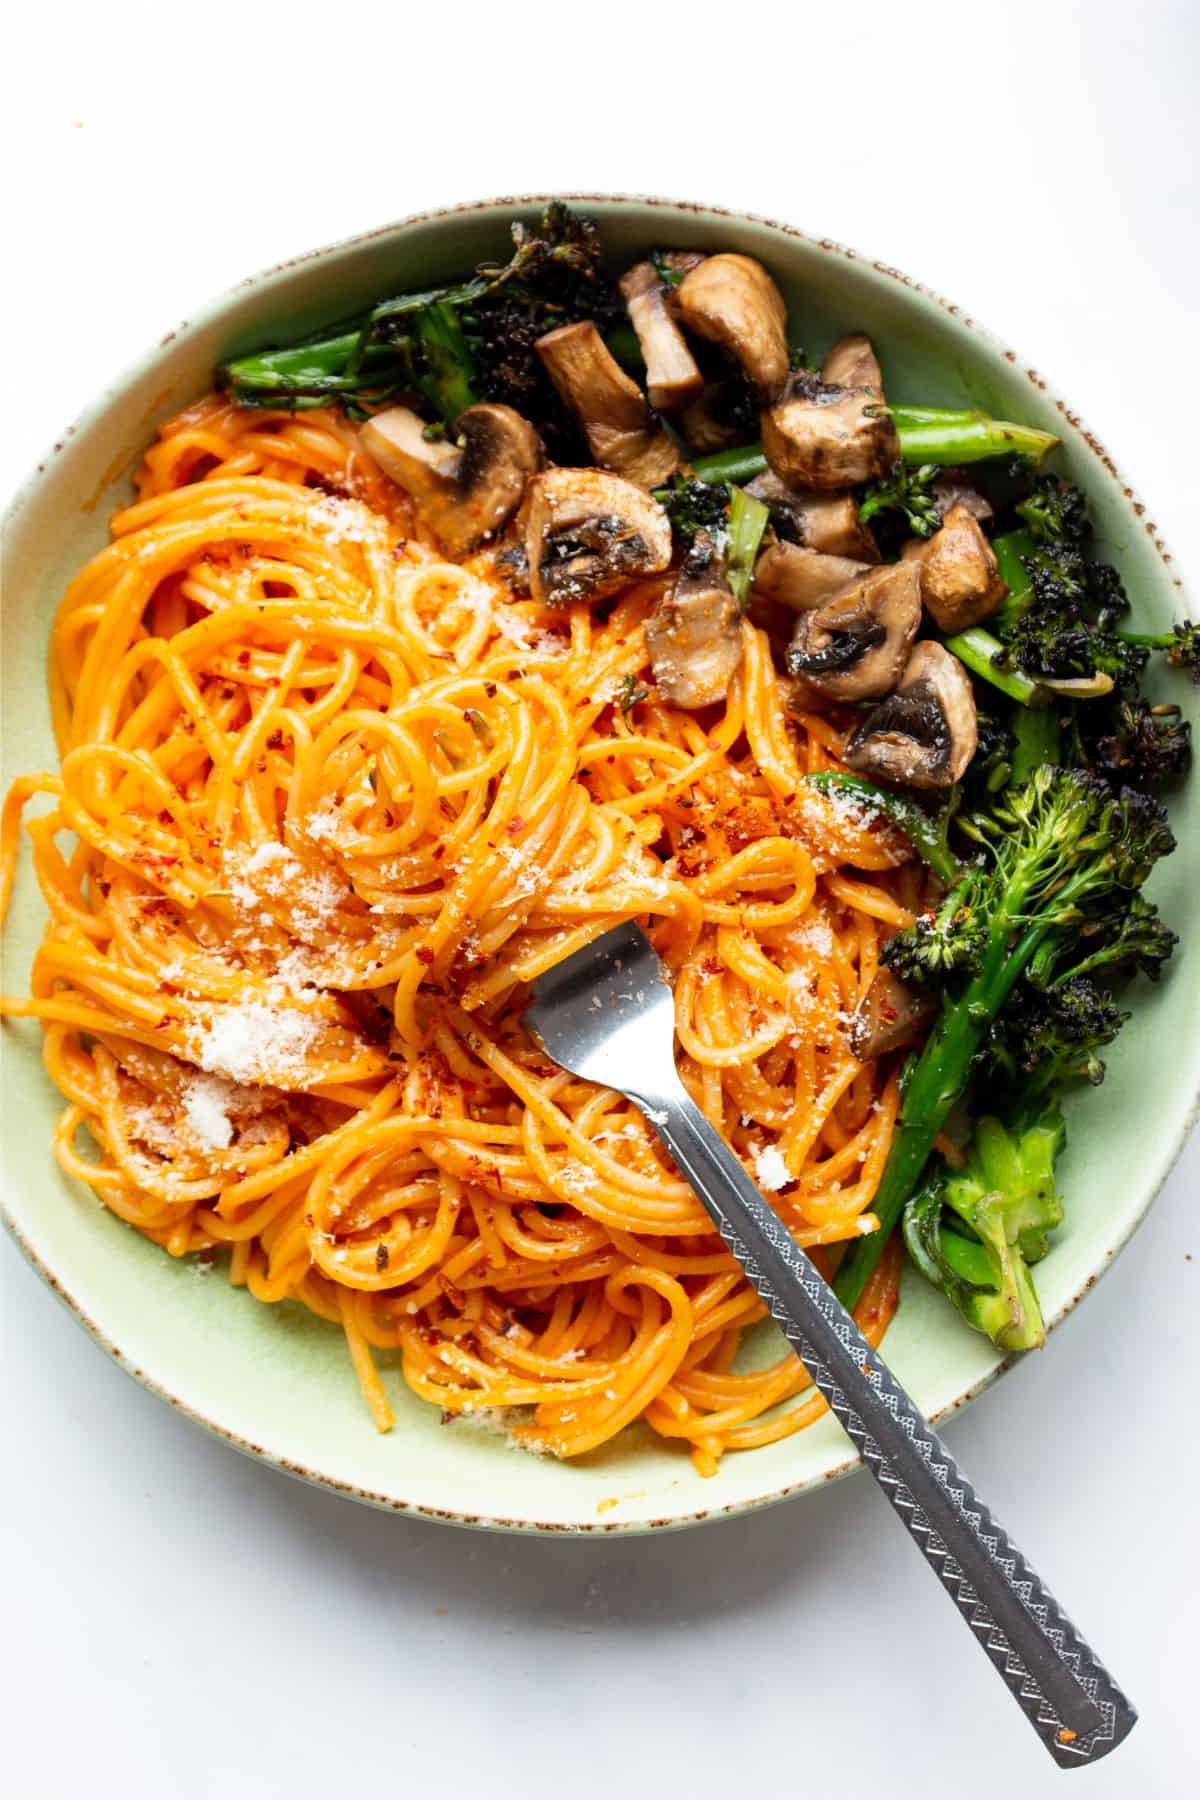 Tomatoey spaghetti in a bowl with a fork topped with grated parmesan and serve with mushrooms and broccoli.